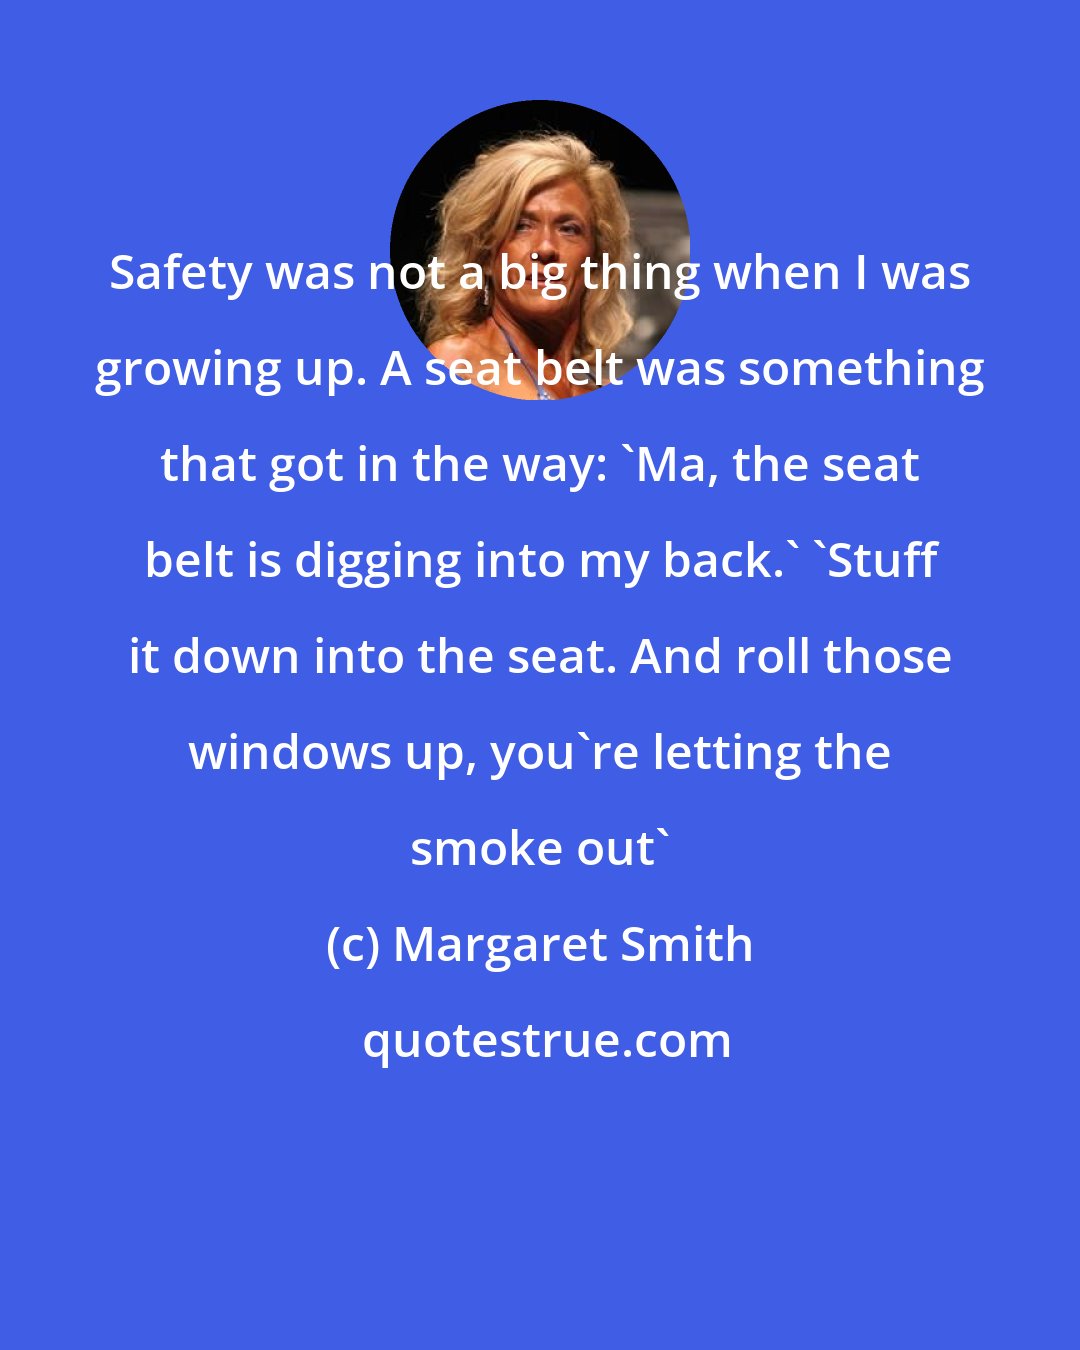 Margaret Smith: Safety was not a big thing when I was growing up. A seat belt was something that got in the way: 'Ma, the seat belt is digging into my back.' 'Stuff it down into the seat. And roll those windows up, you're letting the smoke out'